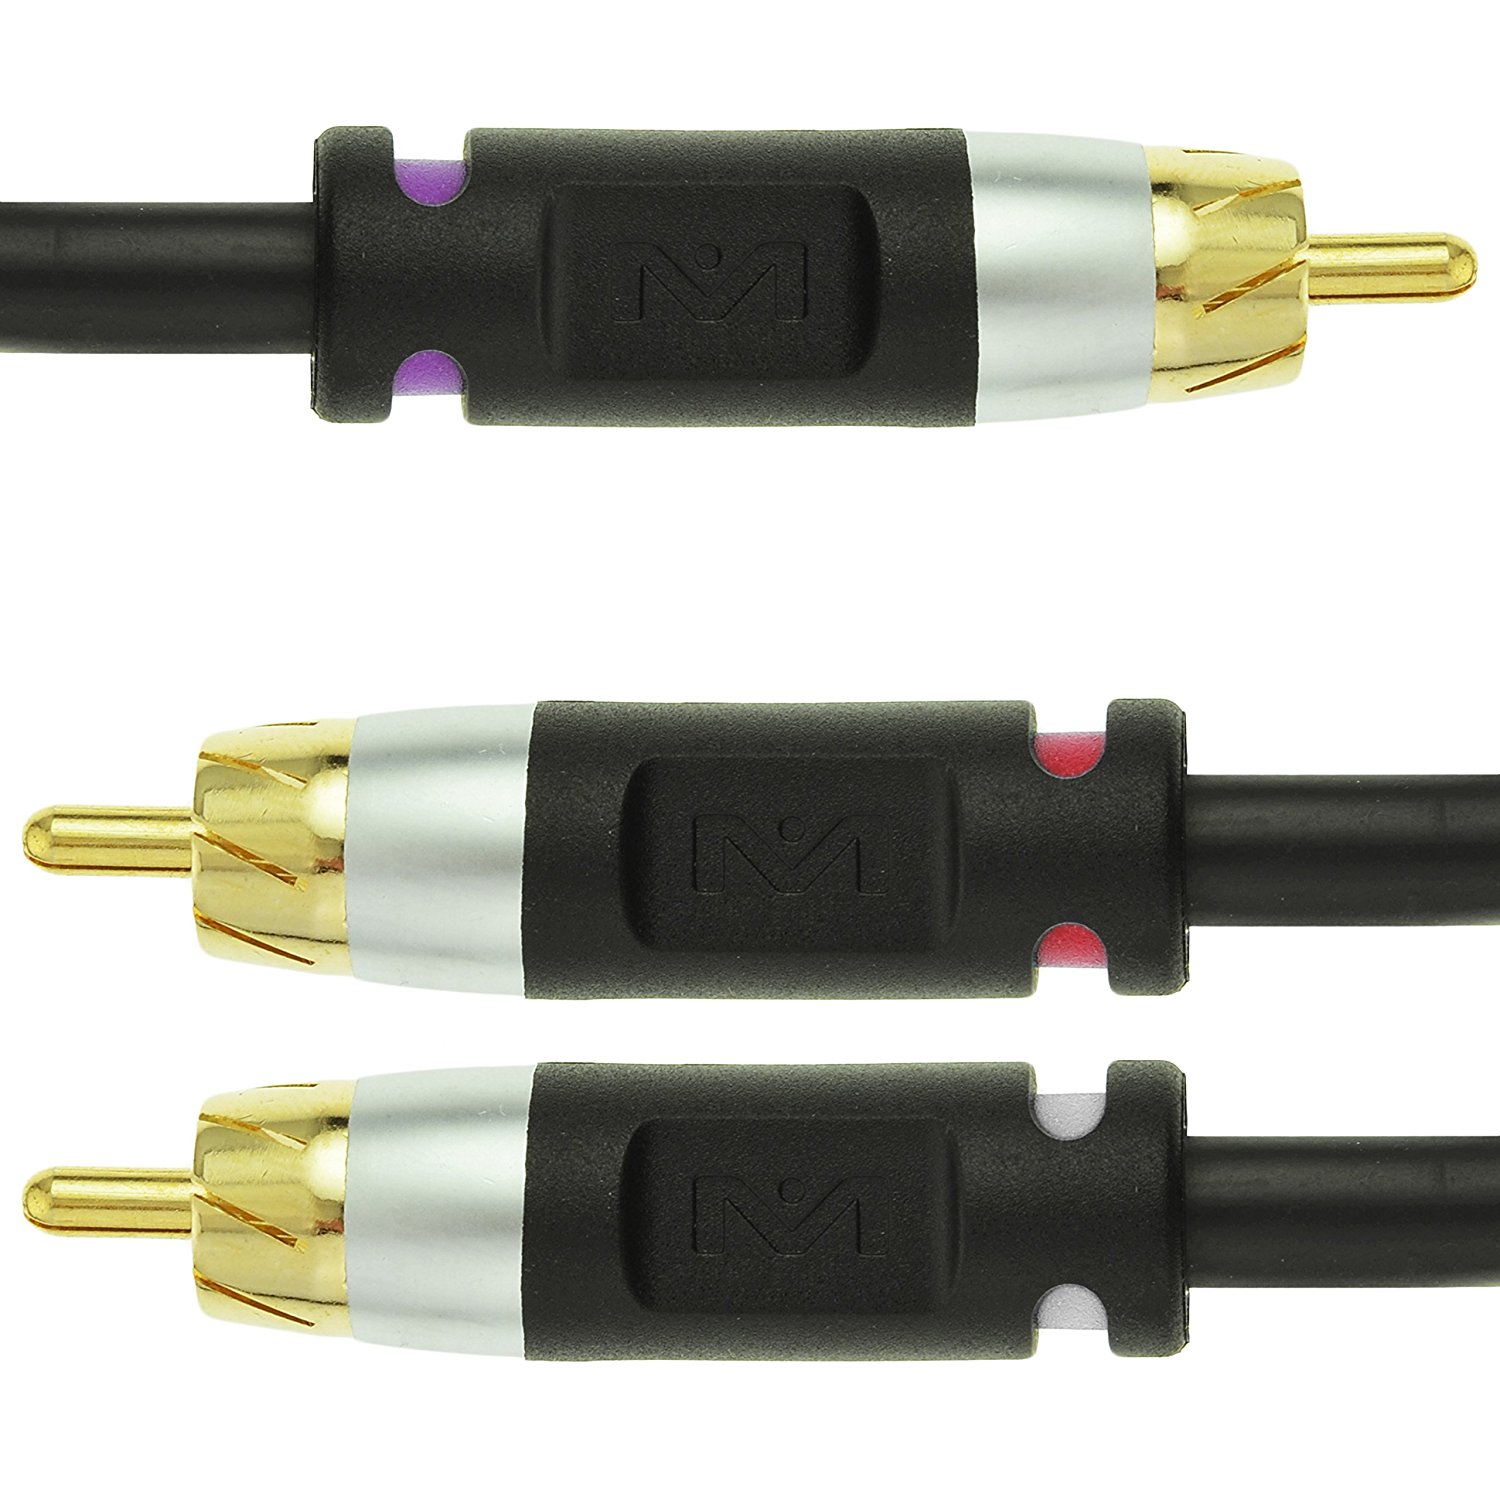 Mediabridge ULTRA Series RCA Y-Adapter (8 Feet) - 1-Male to 2-Male for Digital Audio or Subwoofer - Dual Shielded with RCA to RCA Gold-Plated Connectors - Black - (Part# CYA-1M2M-8B ) - image 2 of 4